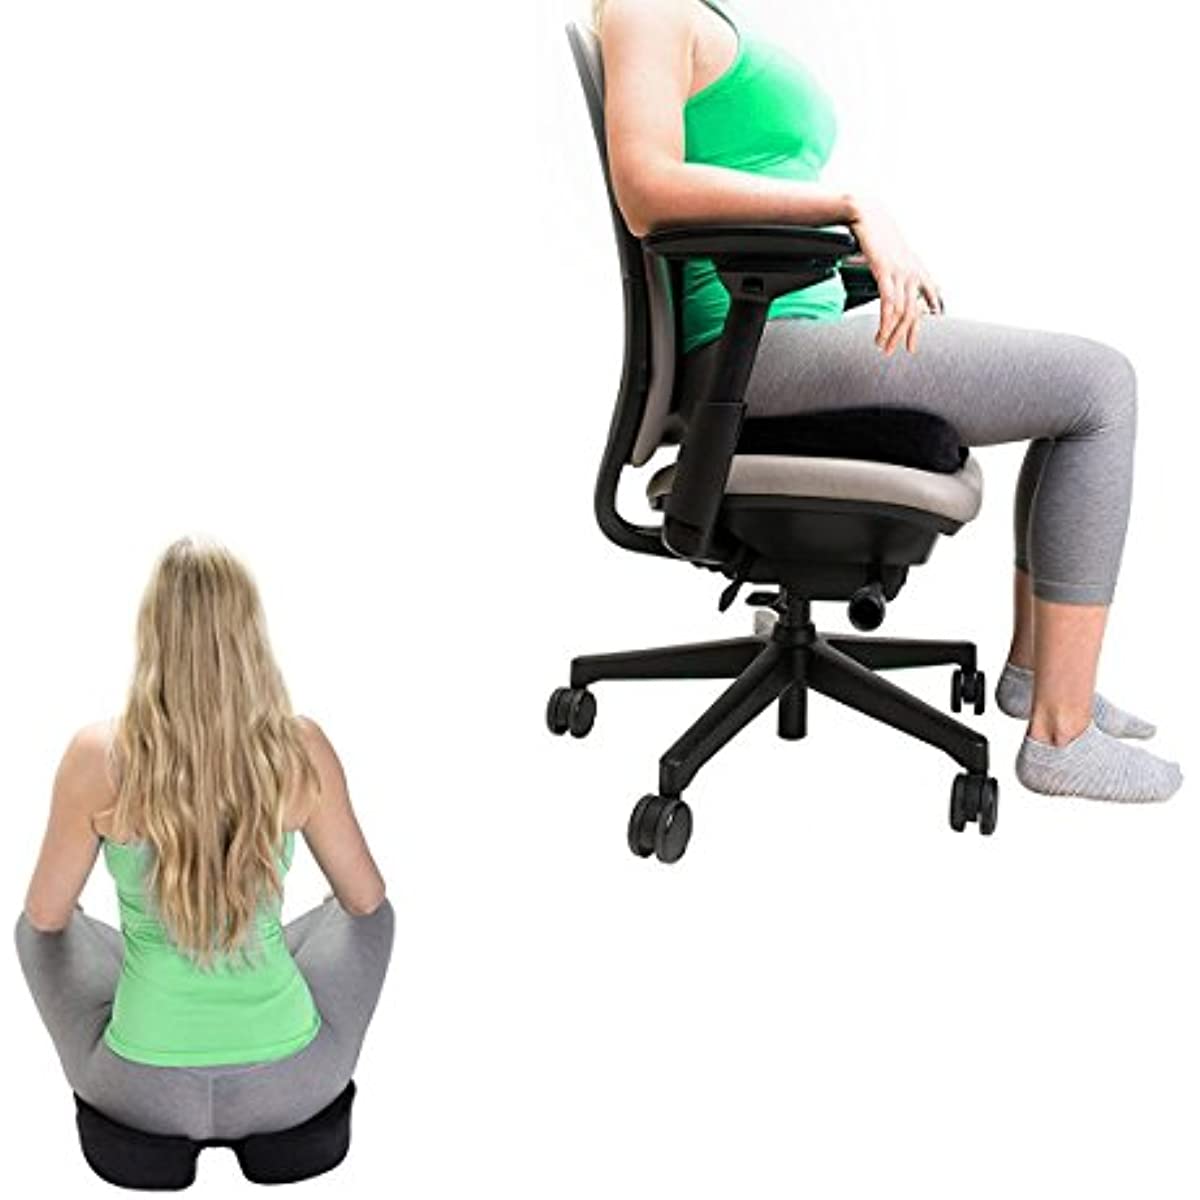 45d Memory Foam Coccyx Cushion For Office Chair And Car - Back